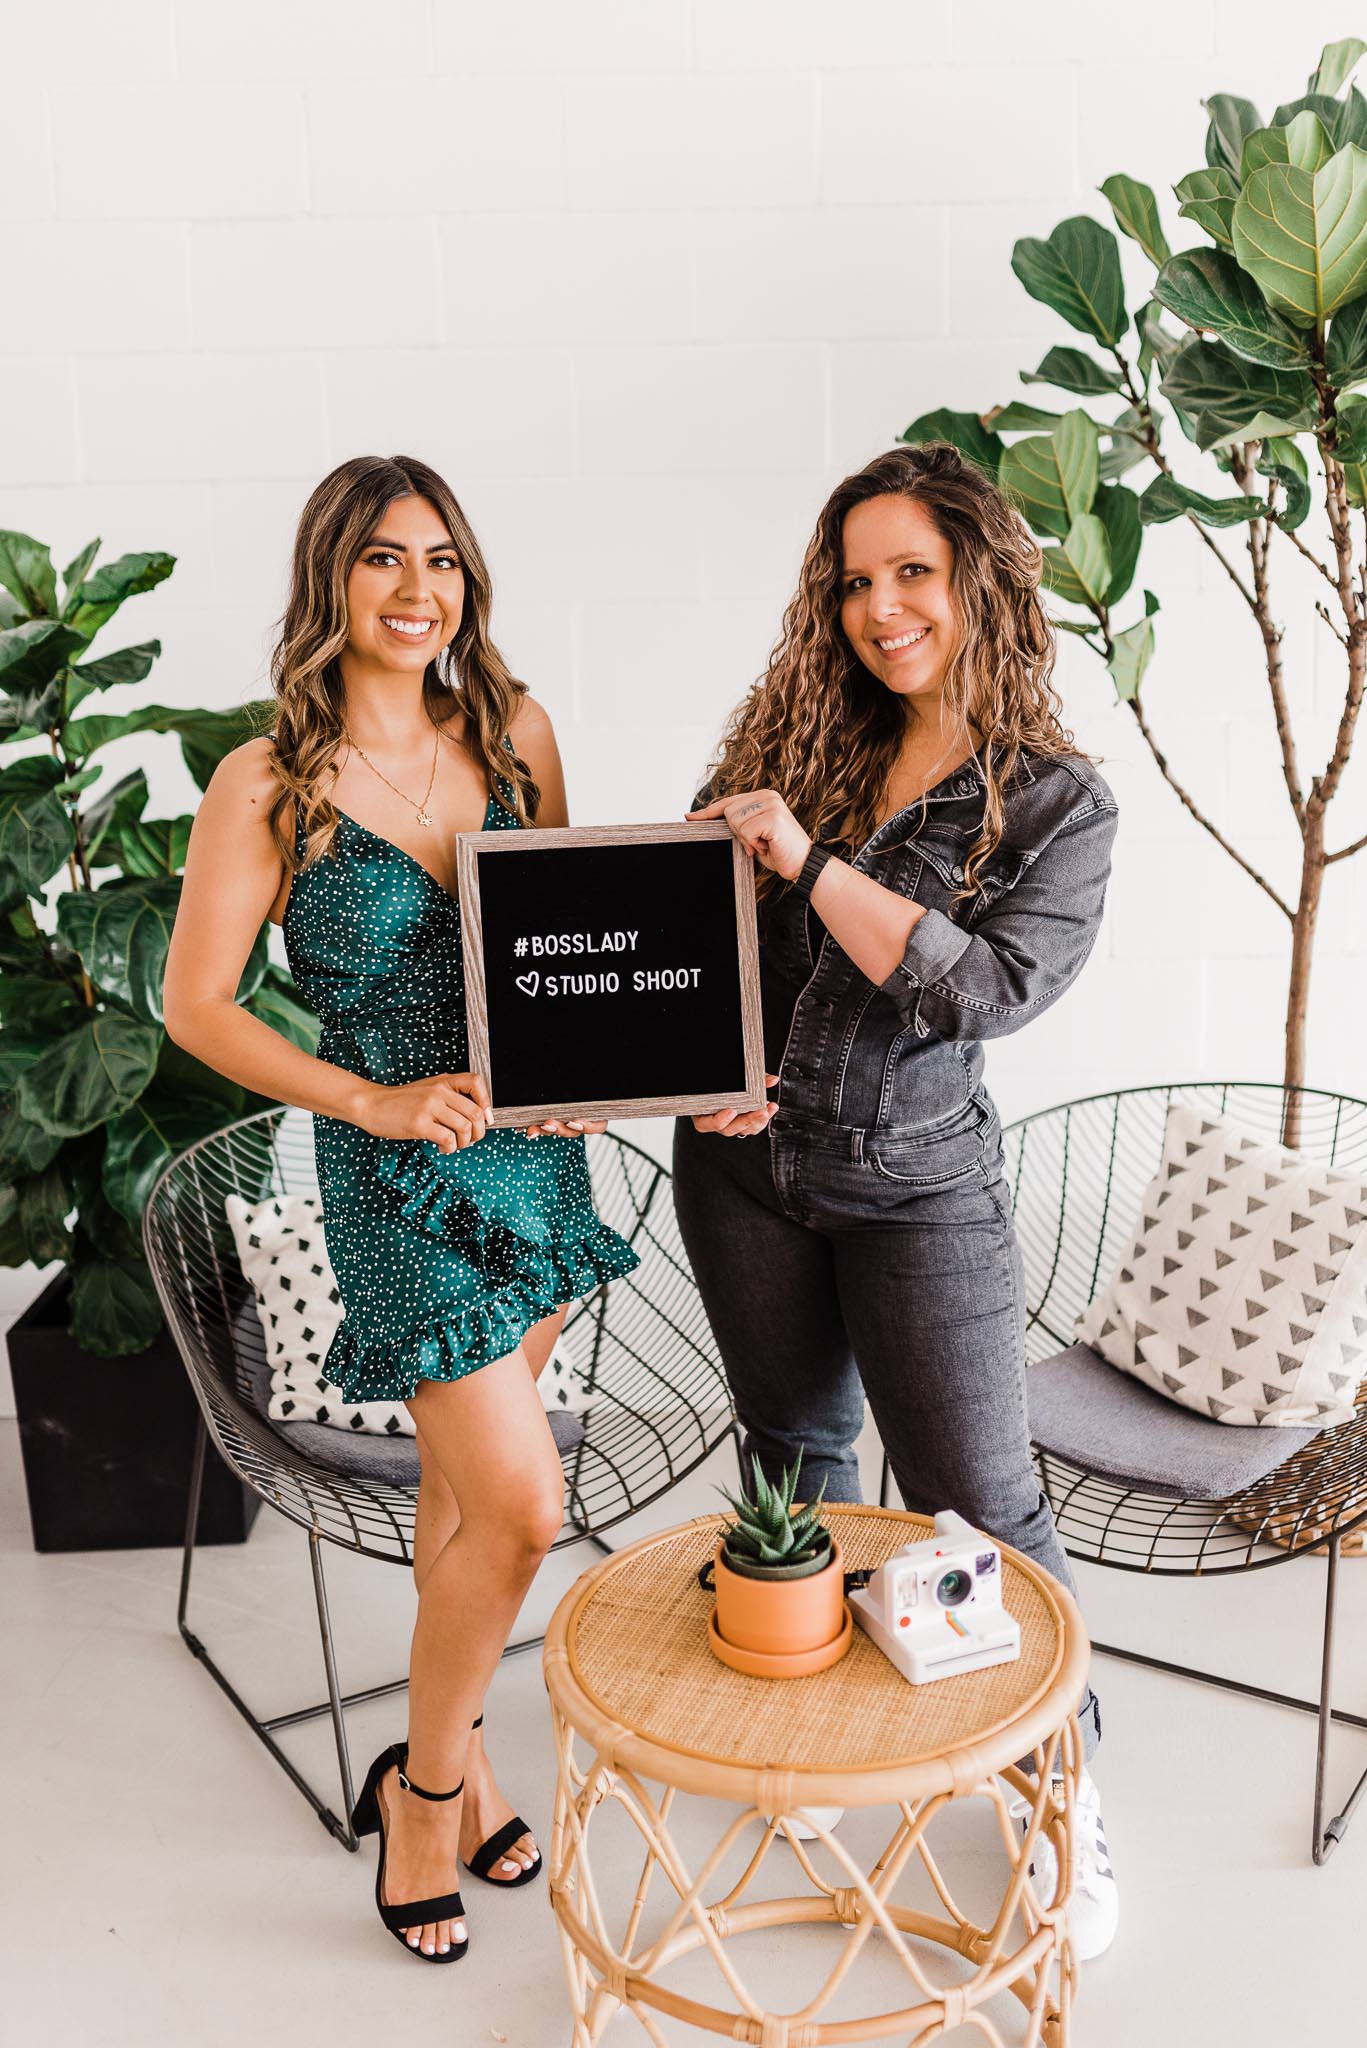 Two bloggers posed with a letter board that says "#BossLady Studio Shoot."